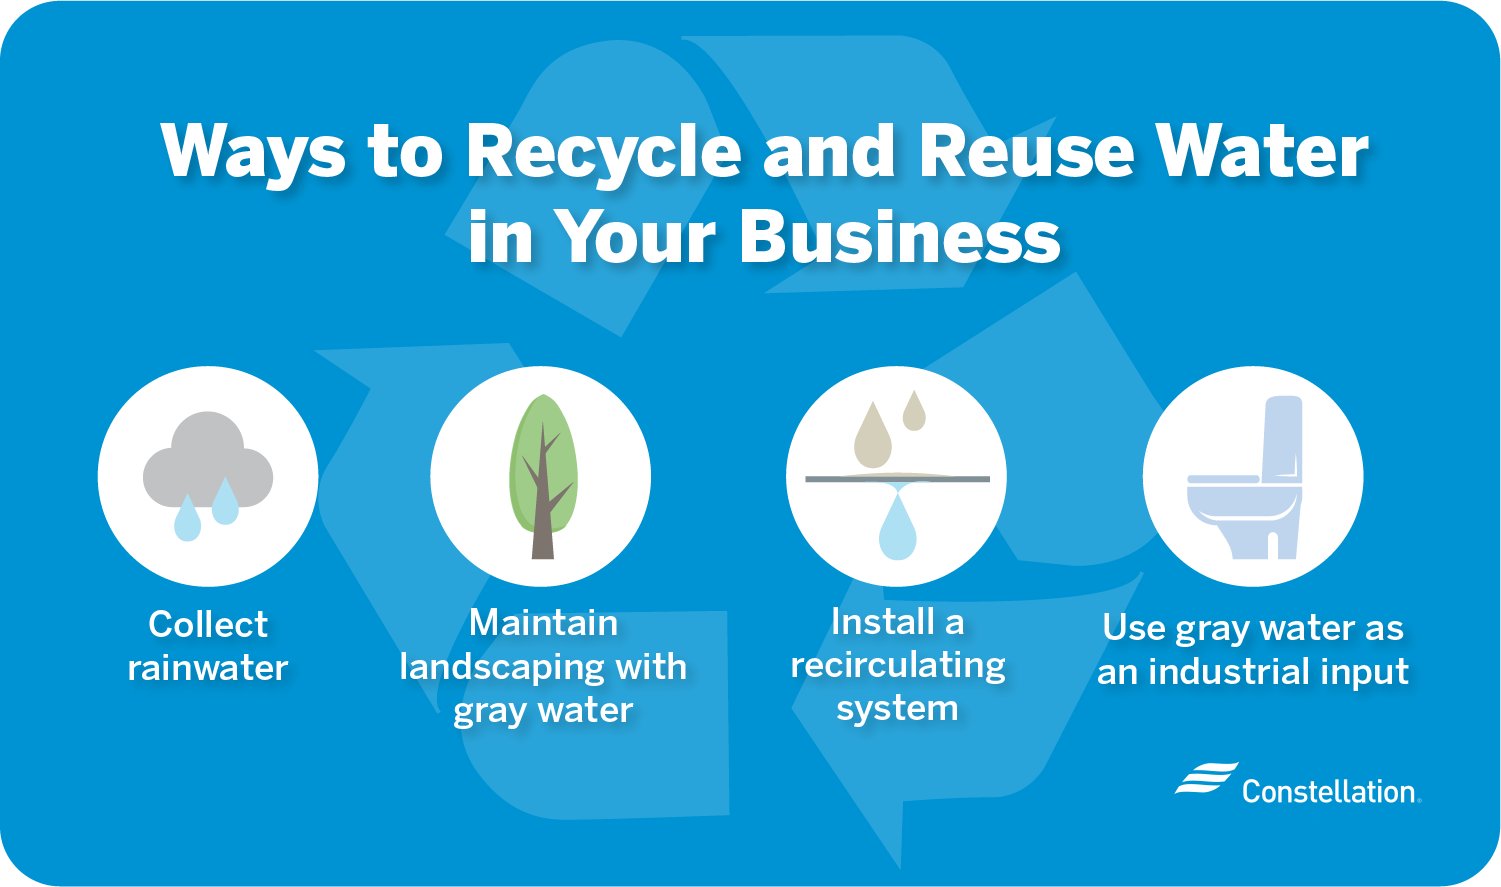 Ways to recycle and reuse water in your business